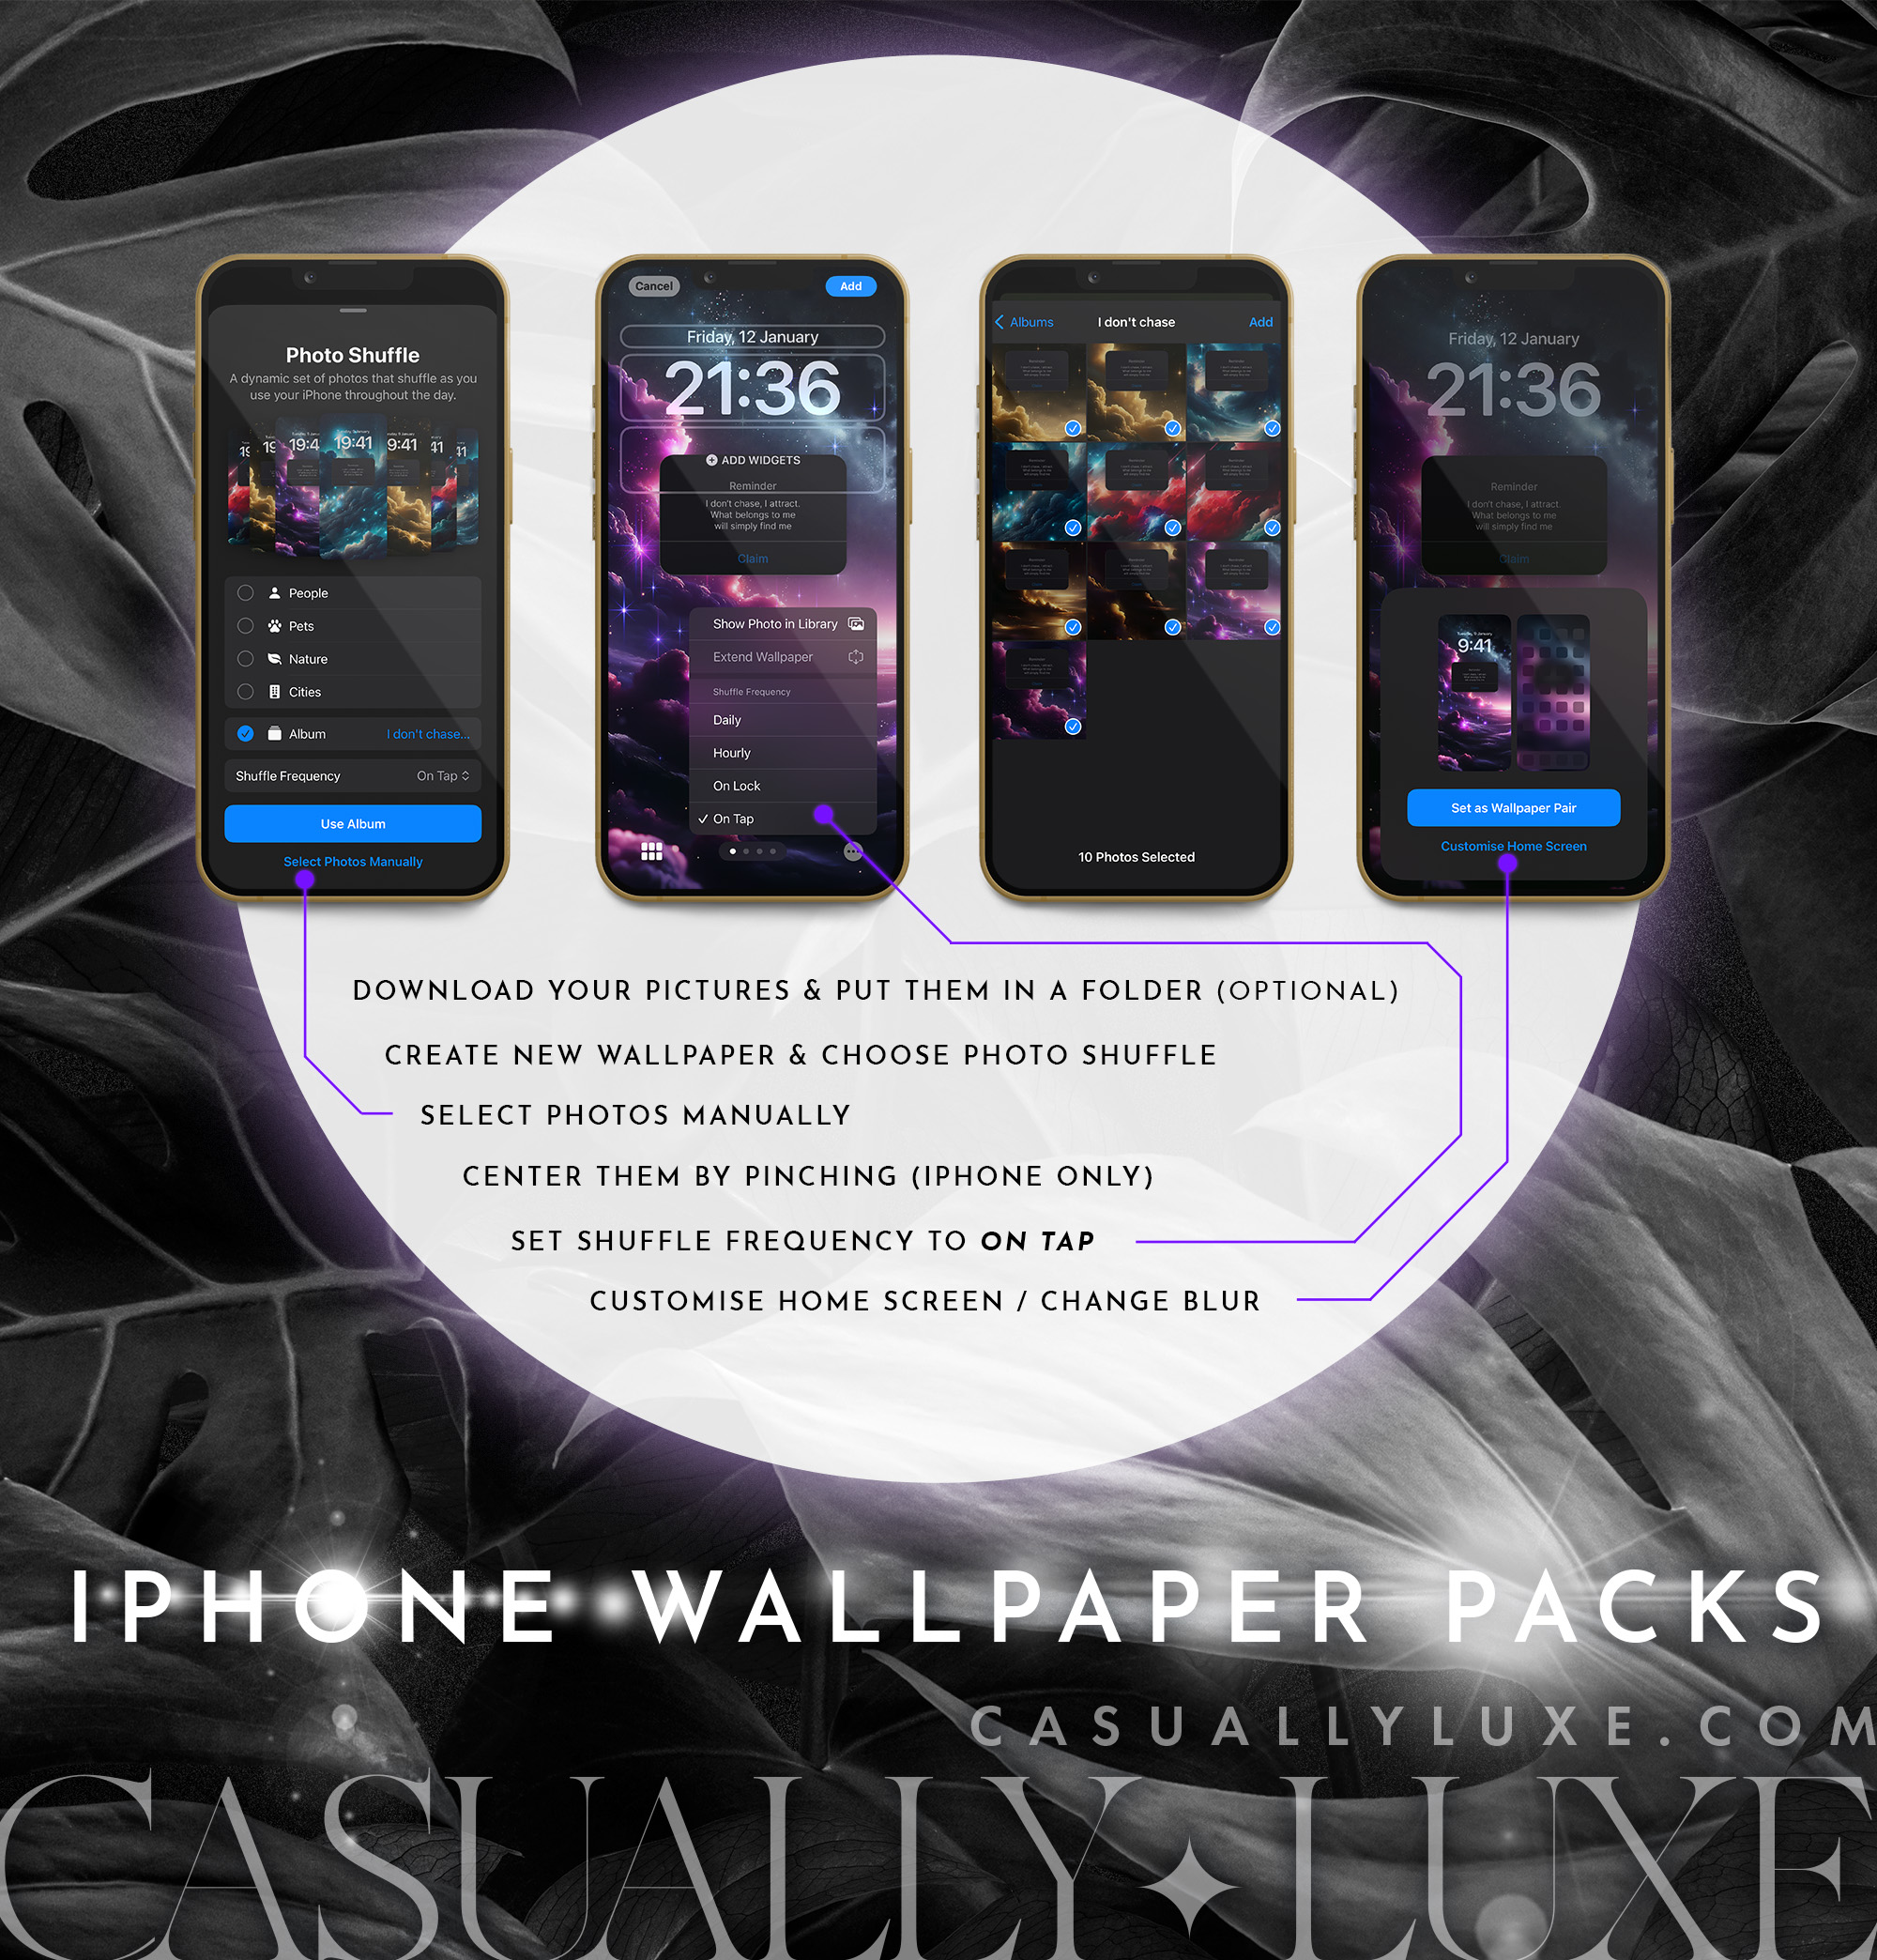 How to change iPhone wallpaper to Manifesting wallpaper set, step by step detailed instructions